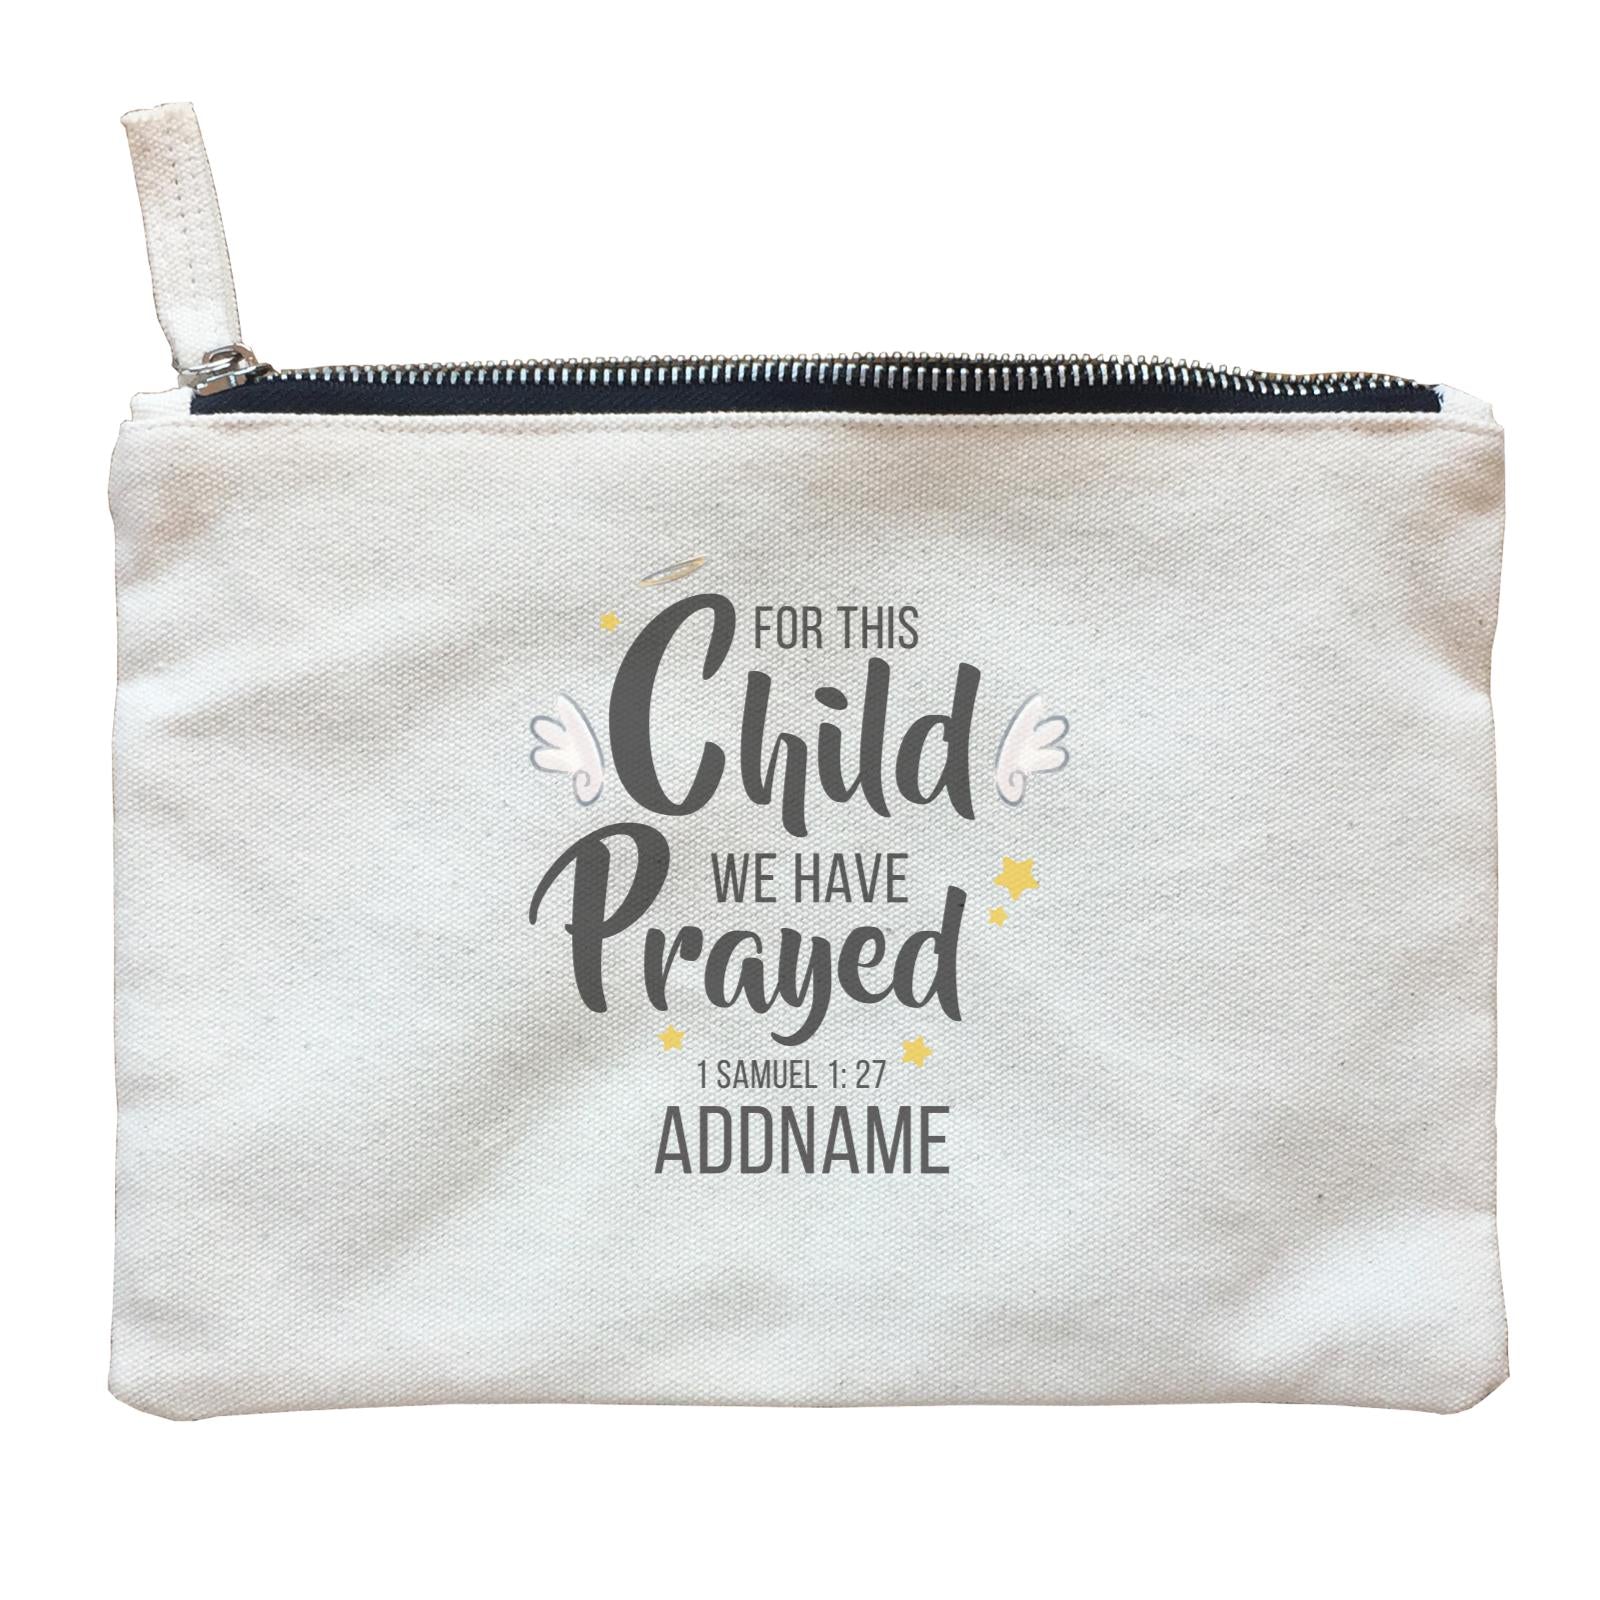 Gods Gift For This Child We Have Prayed 1 Samuel 1.27 Addname Zipper Pouch